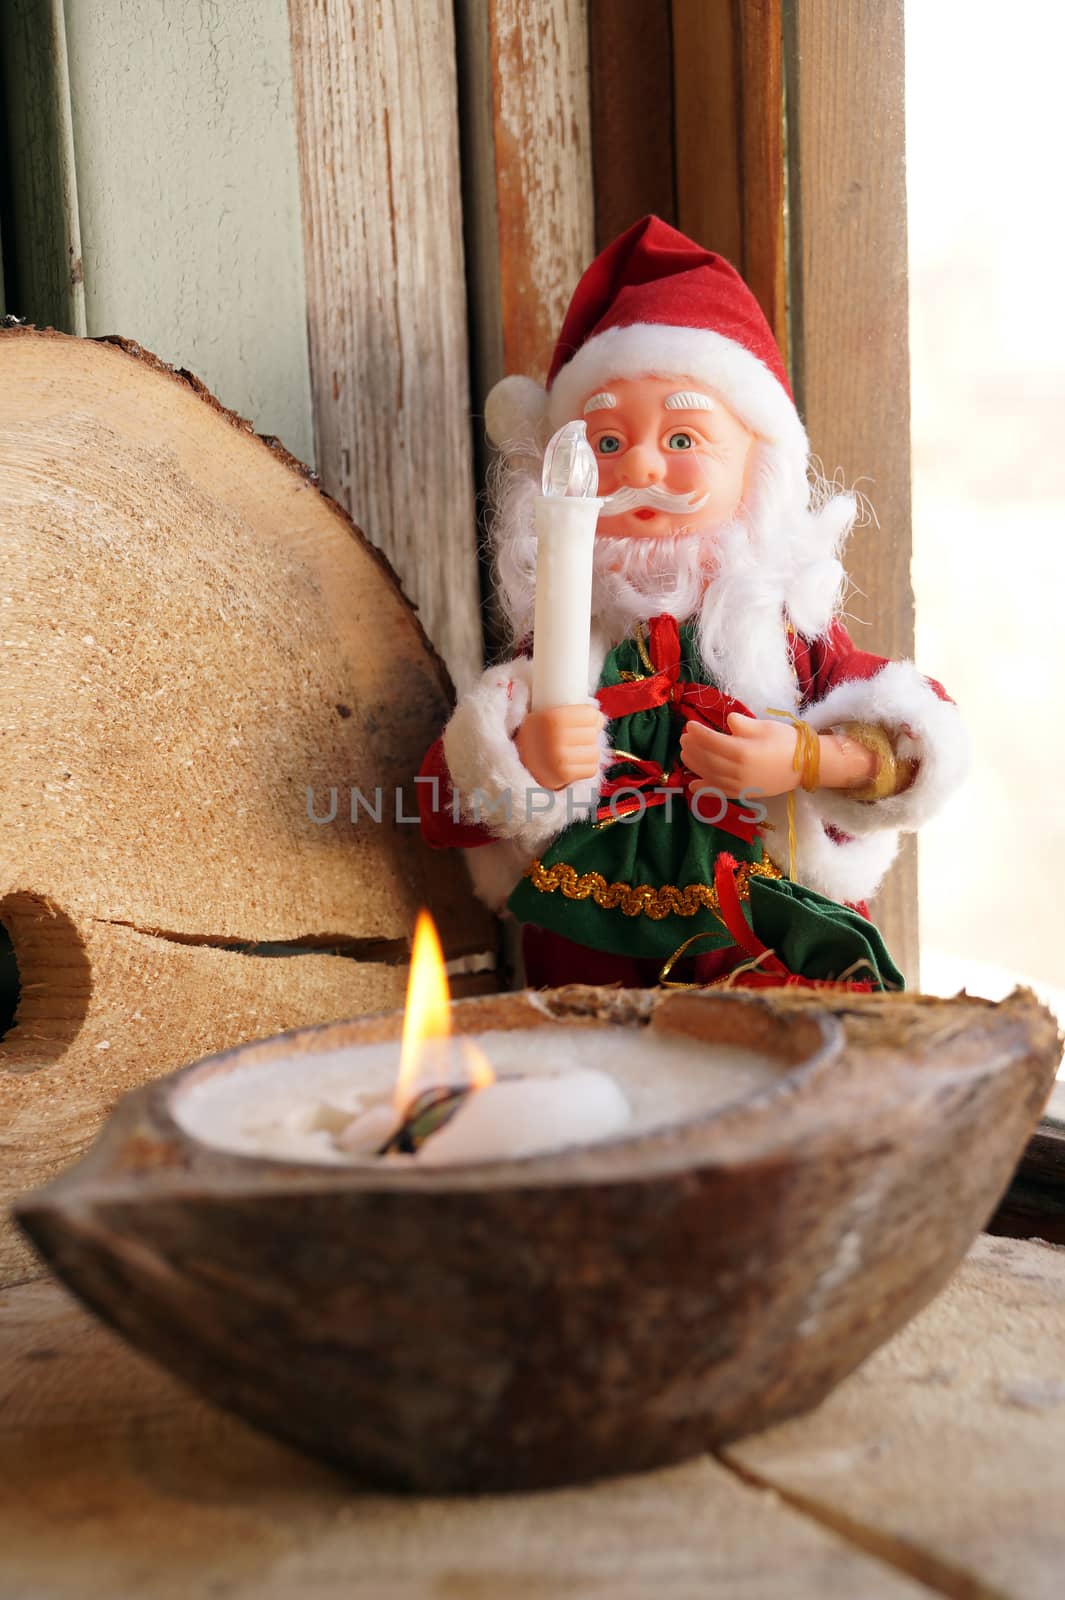 Santa Claus and a candle in a decorative coconut